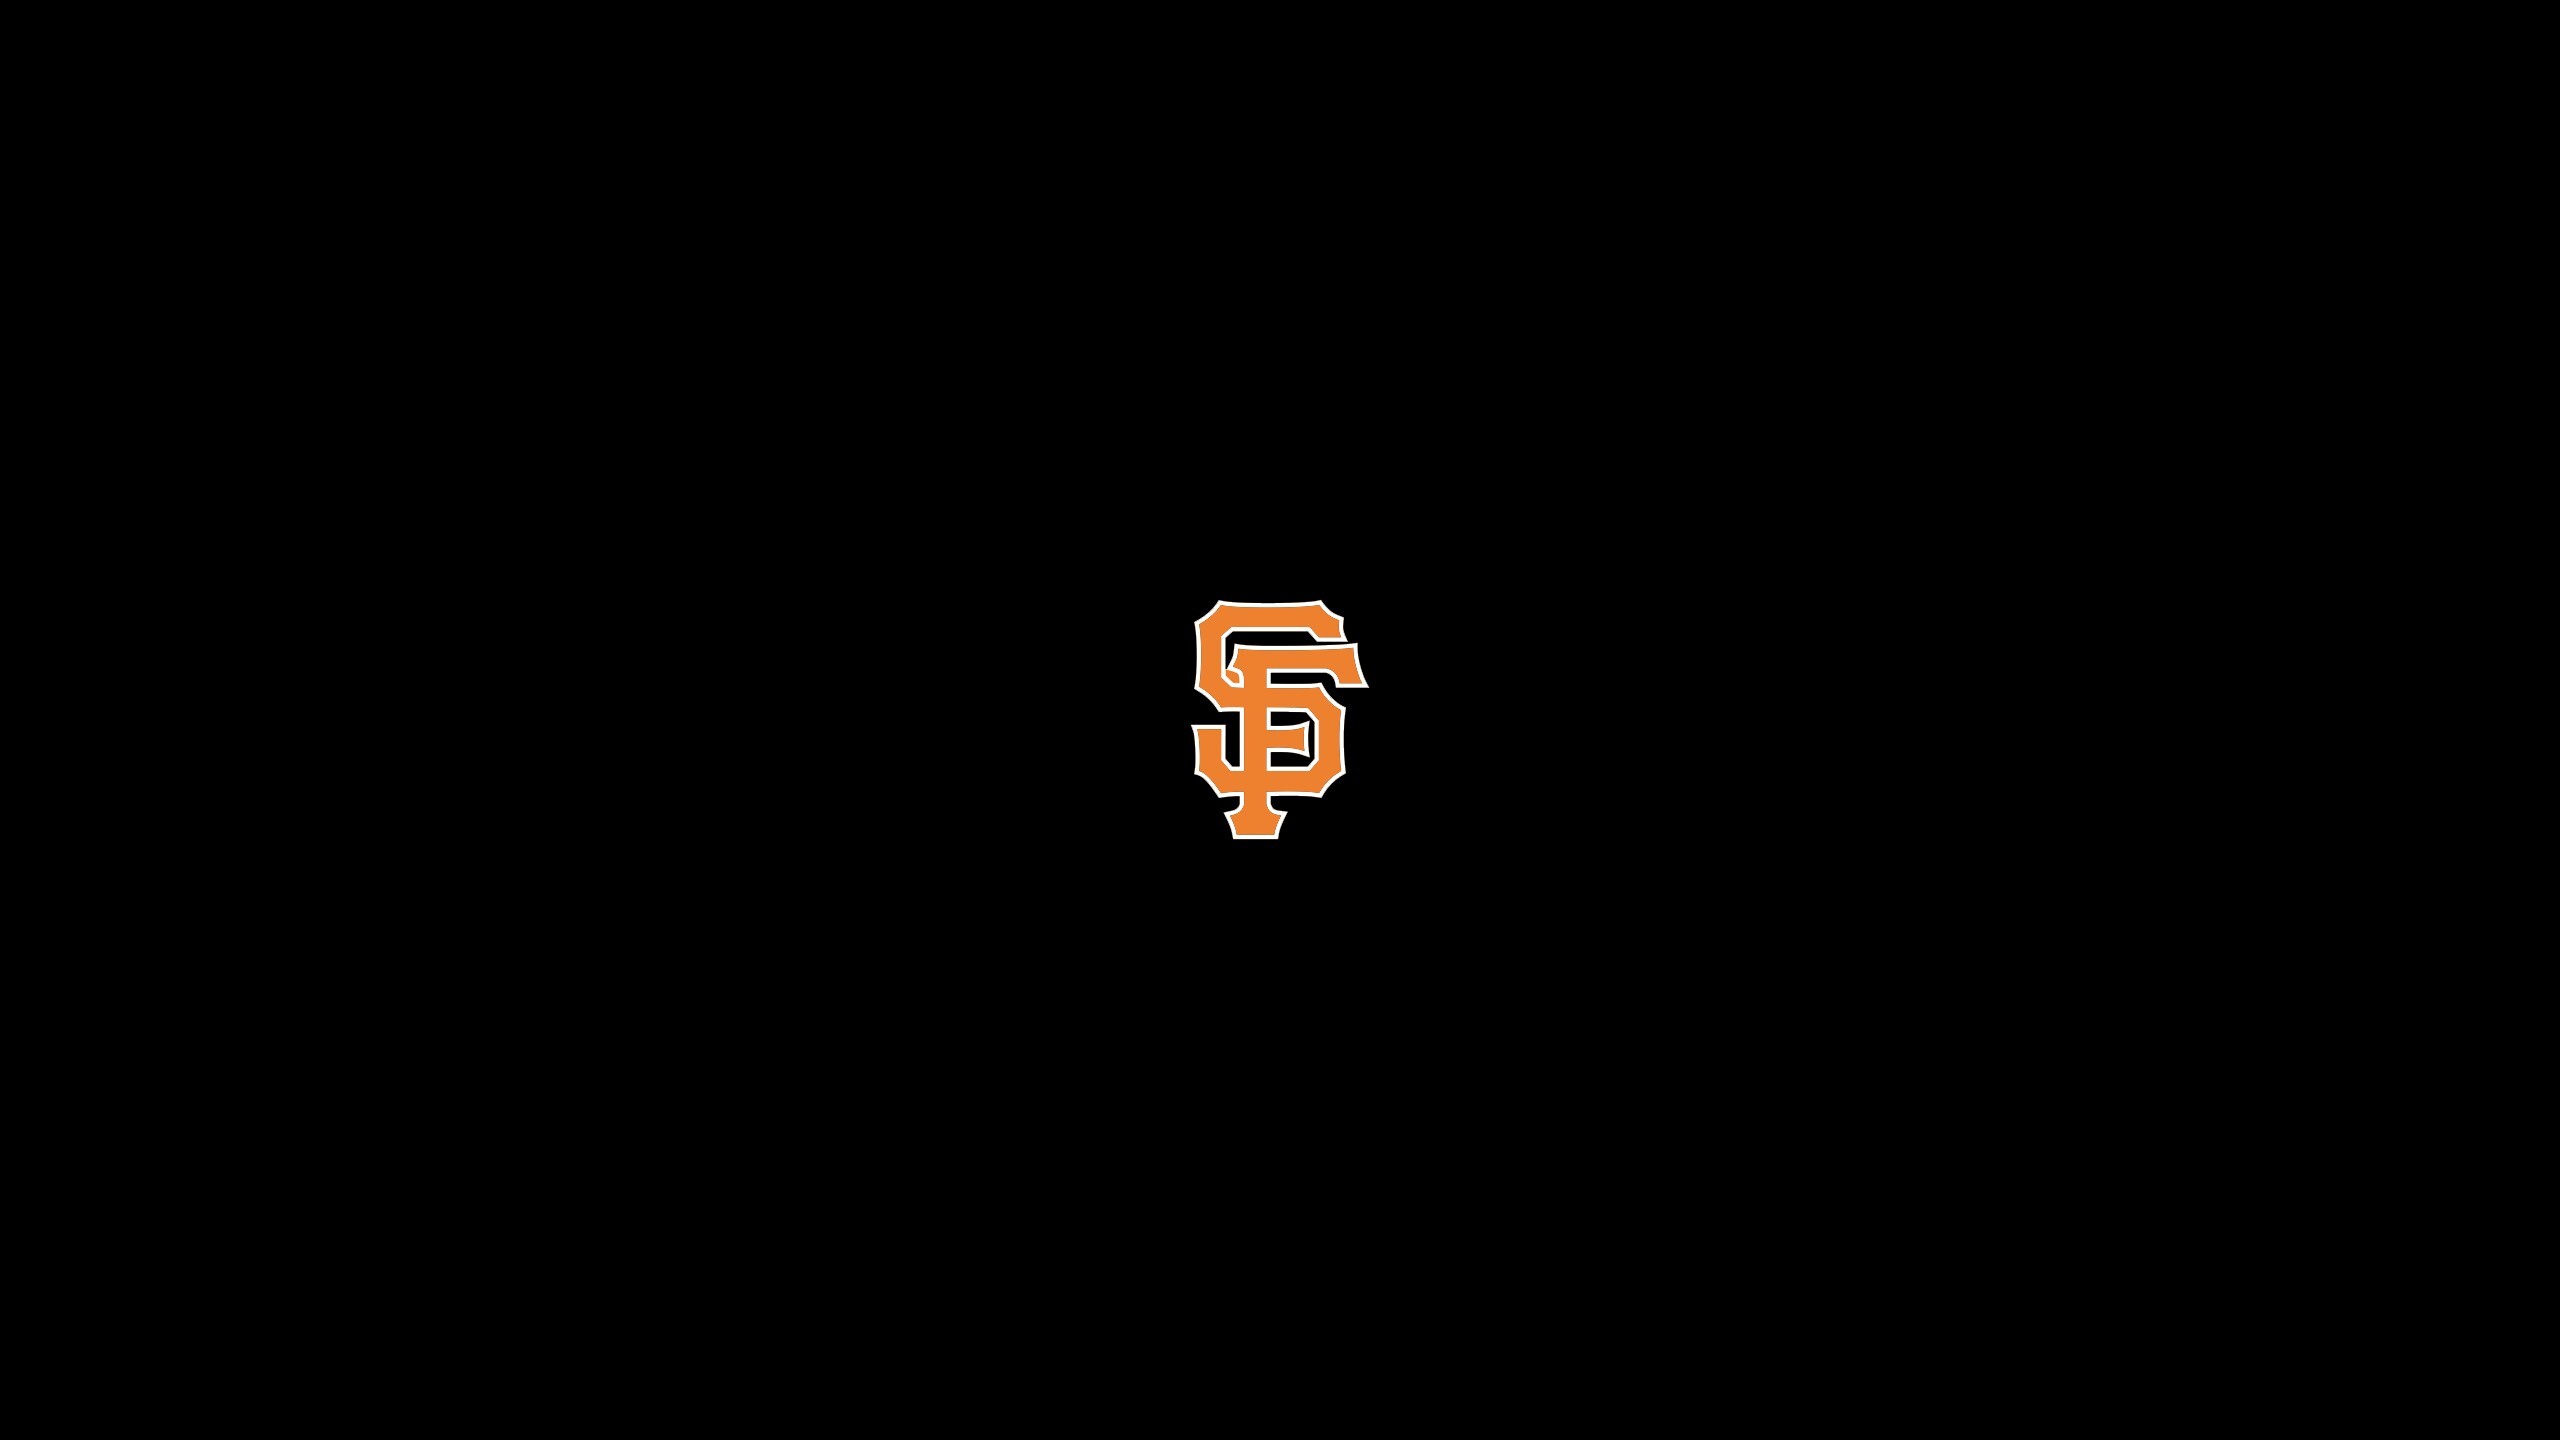 San Francisco Giants: Five-time World Series championships winners, The Baseball Hall of Fame members. 2560x1440 HD Background.